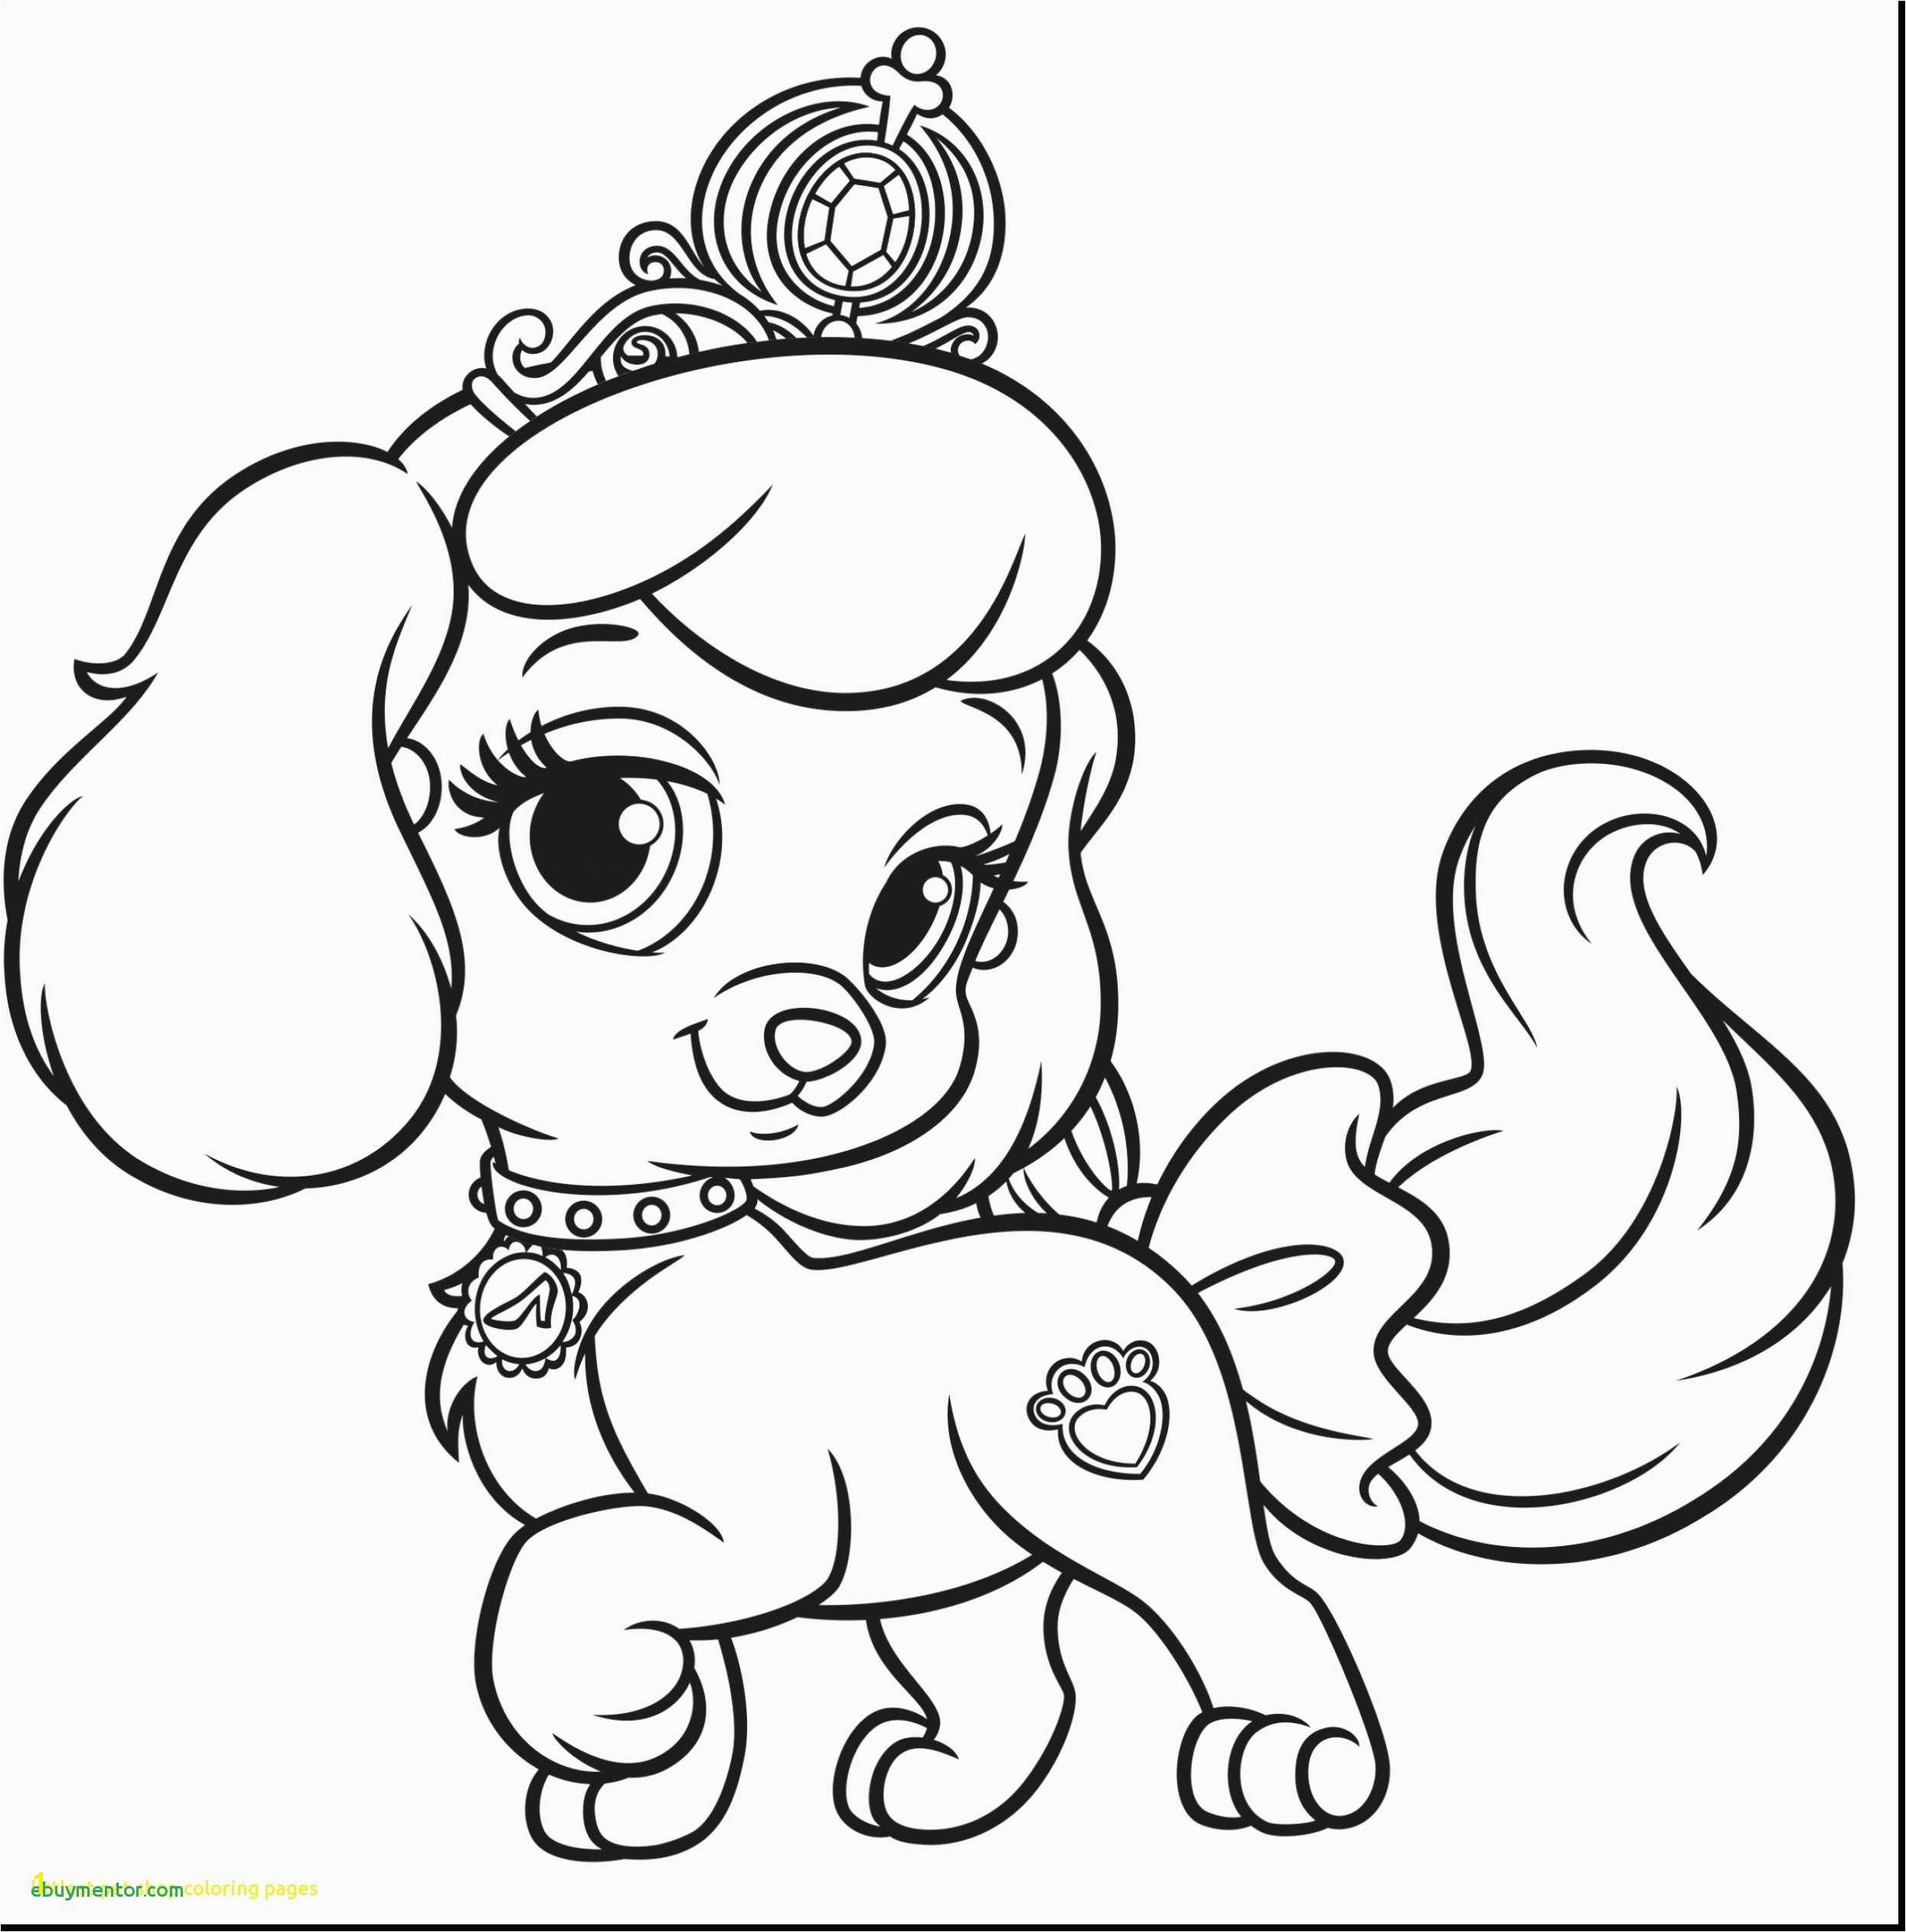 Lps Coloring Pages Inspirational Best Home Coloring Pages Best Color Sheet 0d – Modokom – Fun